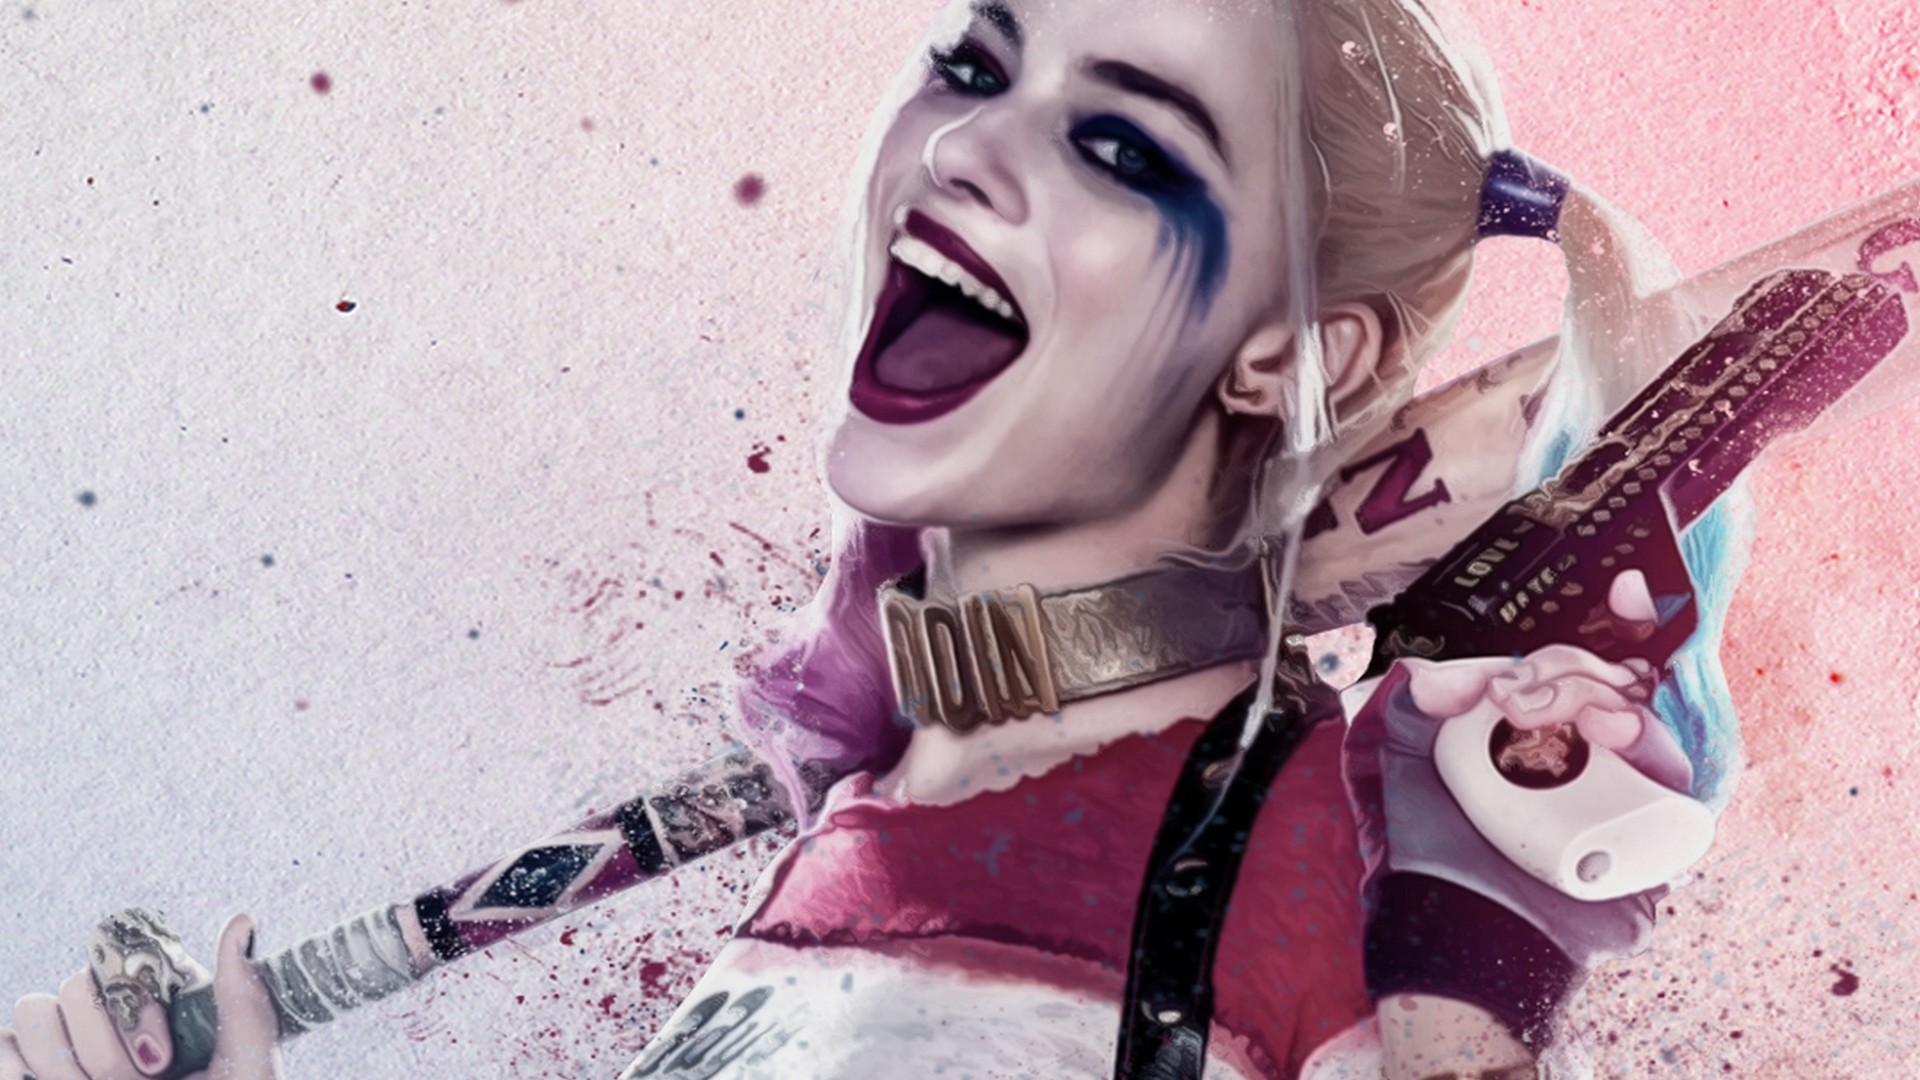 Harley Quinn Movie Desktop Backgrounds HD with image resolution 1920x1080 pixel. You can use this wallpaper as background for your desktop Computer Screensavers, Android or iPhone smartphones